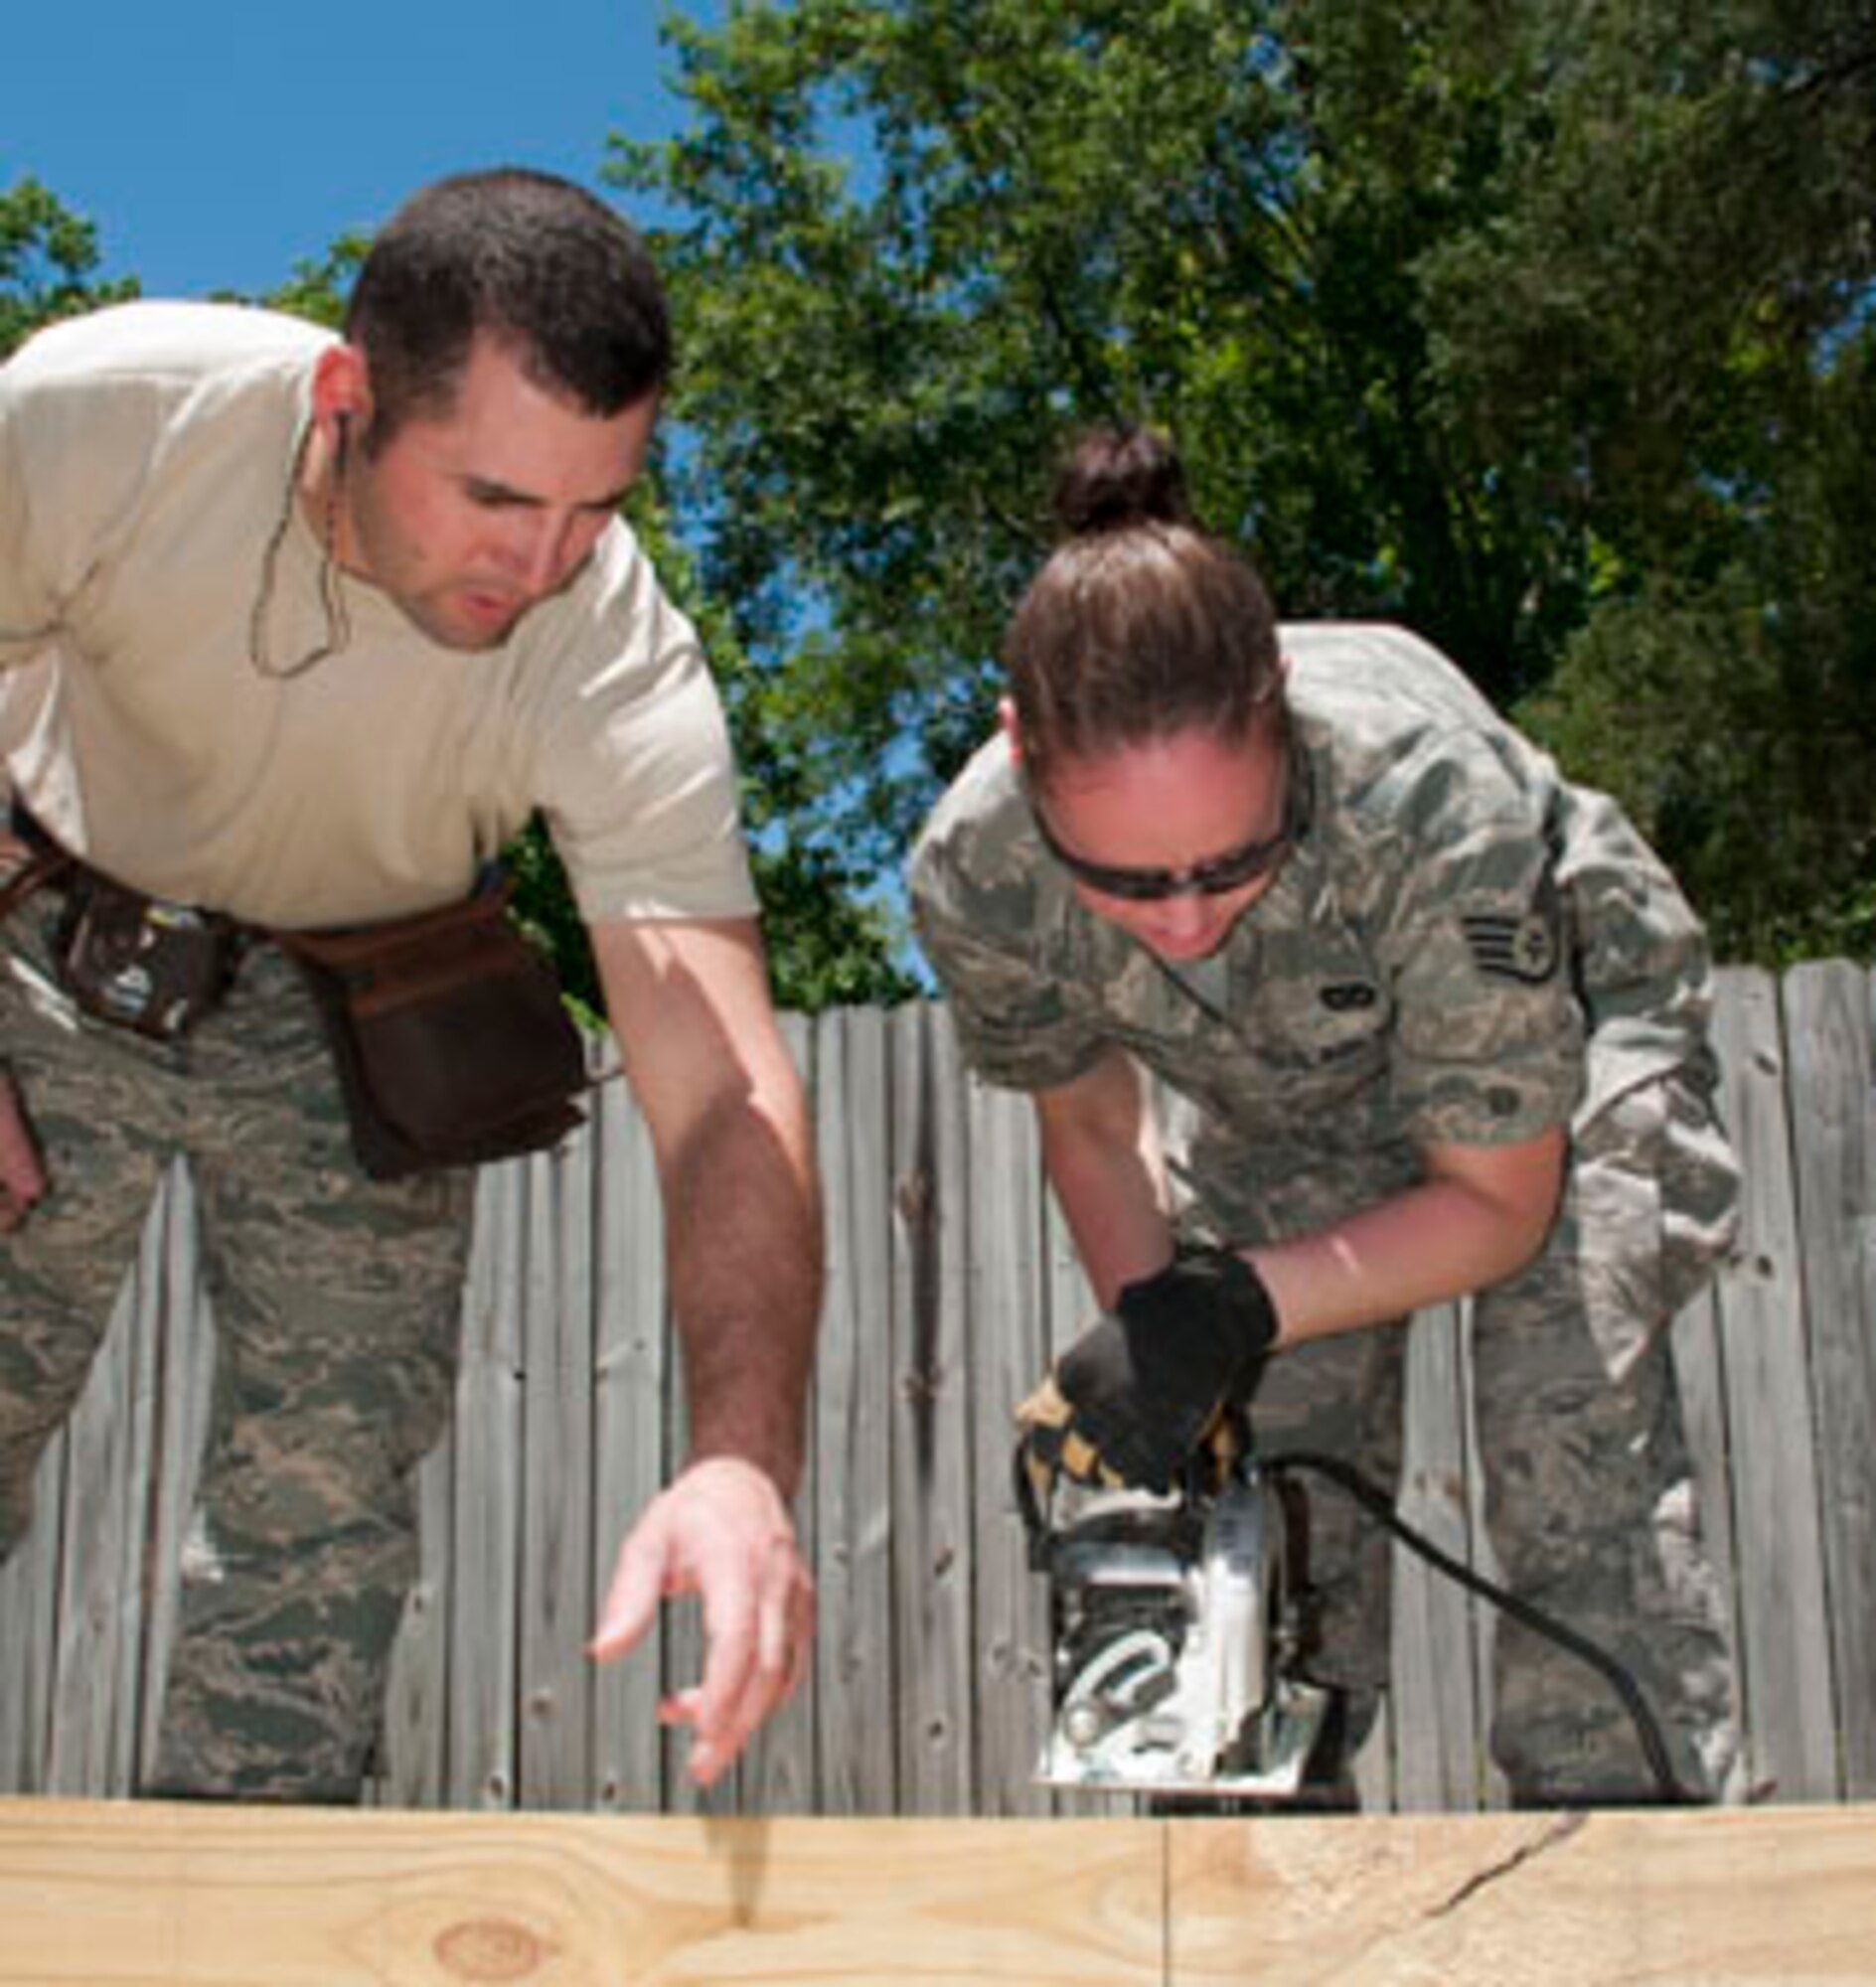 HAYNEVILLE, Ala. -- Staff Sgt. Abigail Olivares, a utilities specialist from the 176th Civil Engineer Squadron, learns to cut a structural beam May 4 under the guidance of Tech. Sgt. Mark Smith, also from the 176th CES,  for a patio covering at a clinic here. Thirty-five members of the 176th Wing arrived here May 1 for 12 days of training through the Innovative Readiness Program. This program allows Guard and Reserve members to get the training they need while at the same time delivering real-world results -- in this case, providing an array of health-care and structural services to a historically underserved area. Alaska Air National Guard photo by Capt. John Callahan.